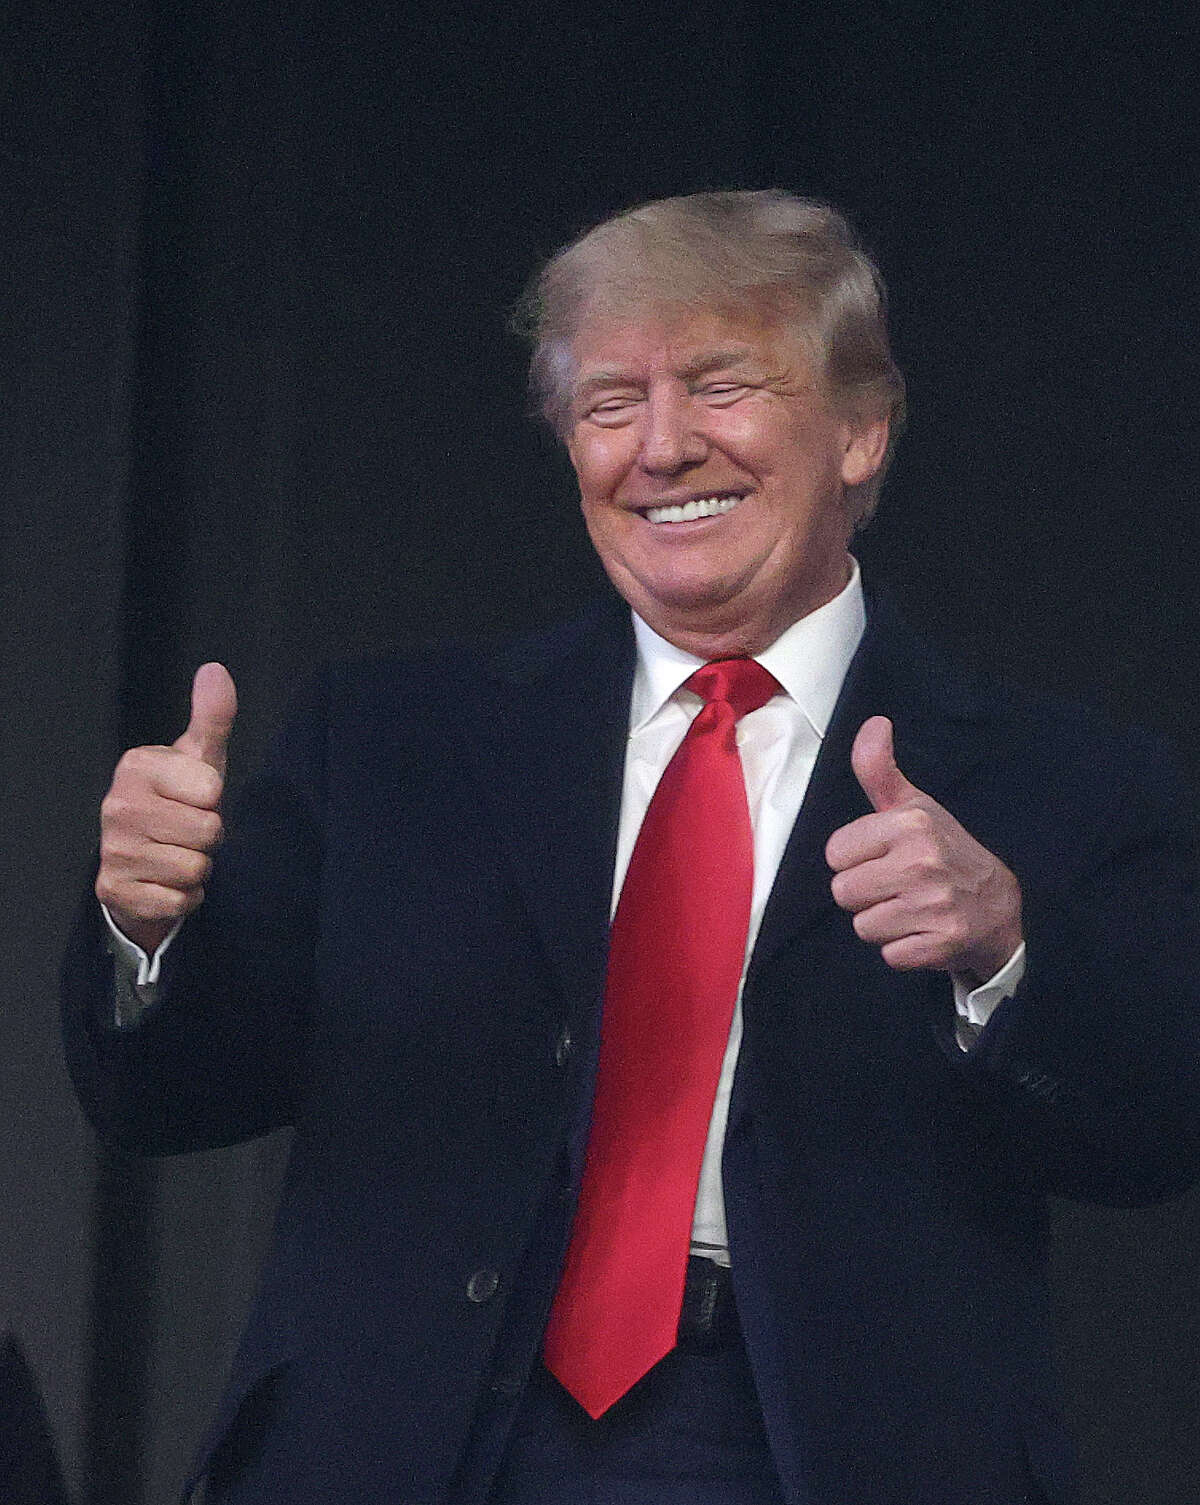 ATLANTA, GEORGIA - OCTOBER 30: Former president of the United States Donald Trump gives a thumbs up prior to Game Four of the World Series between the Houston Astros and the Atlanta Braves Truist Park on October 30, 2021 in Atlanta, Georgia.